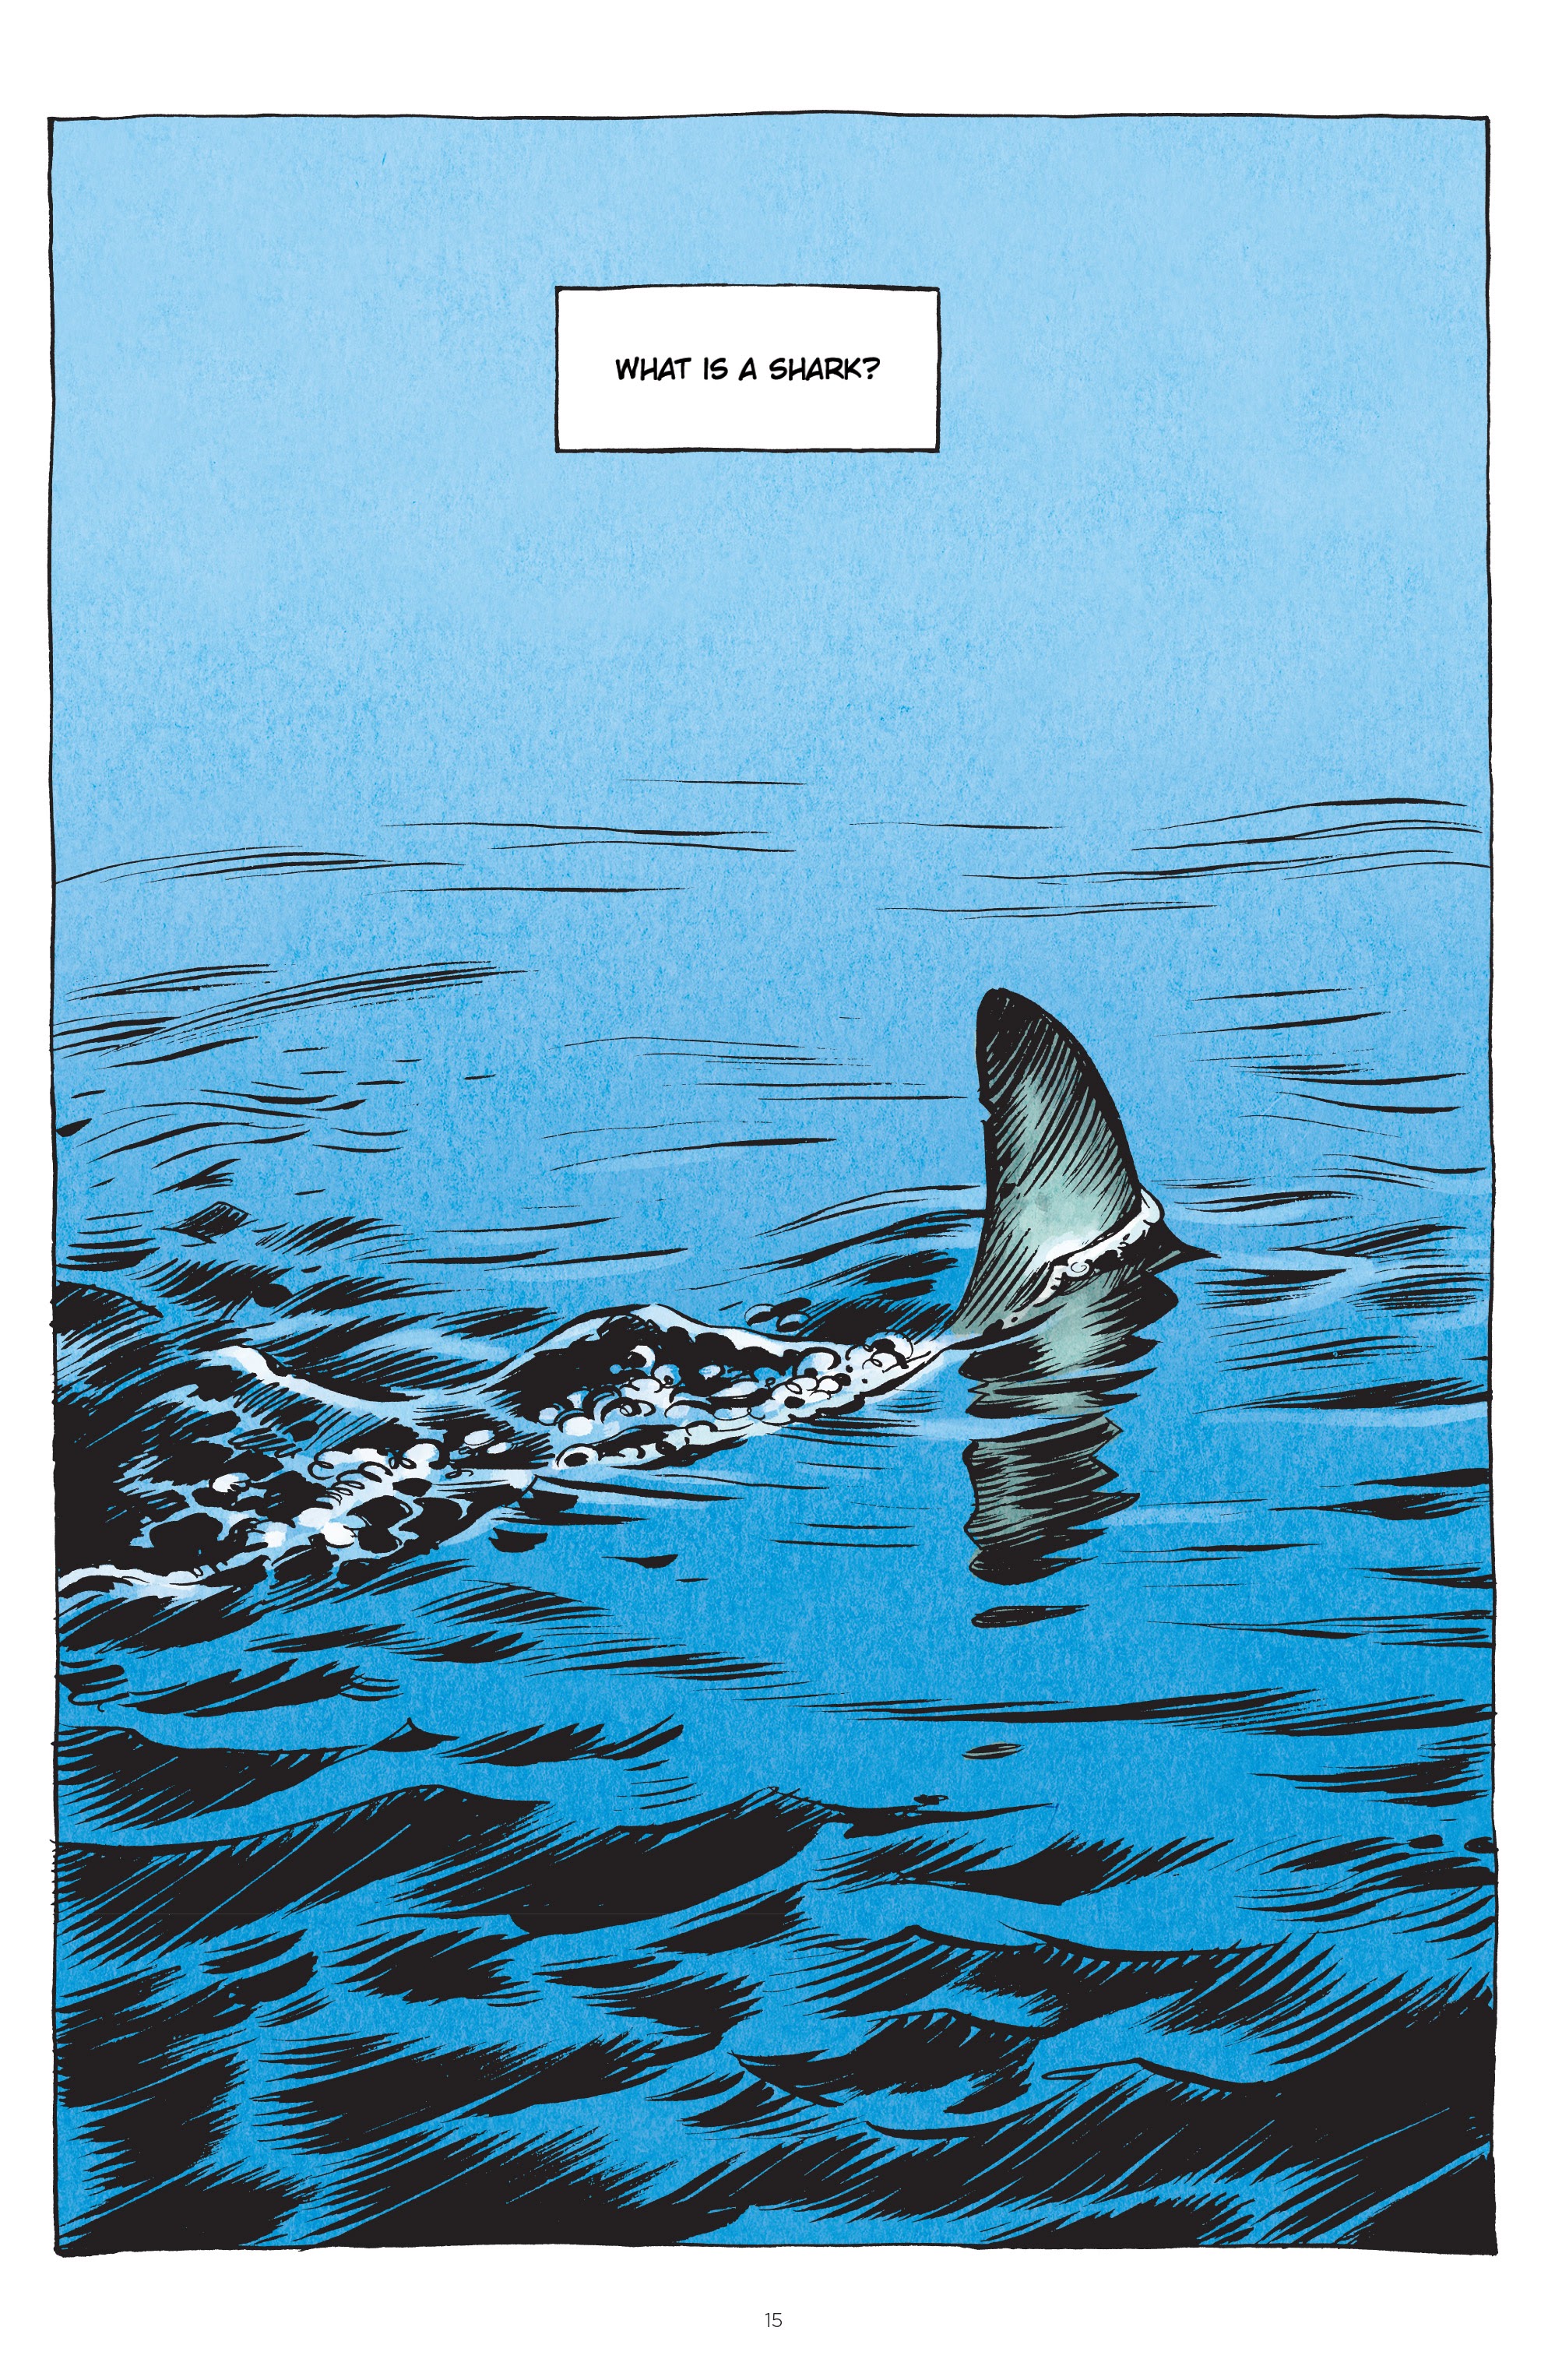 Read online Little Book of Knowledge: Sharks comic -  Issue # TPB - 15